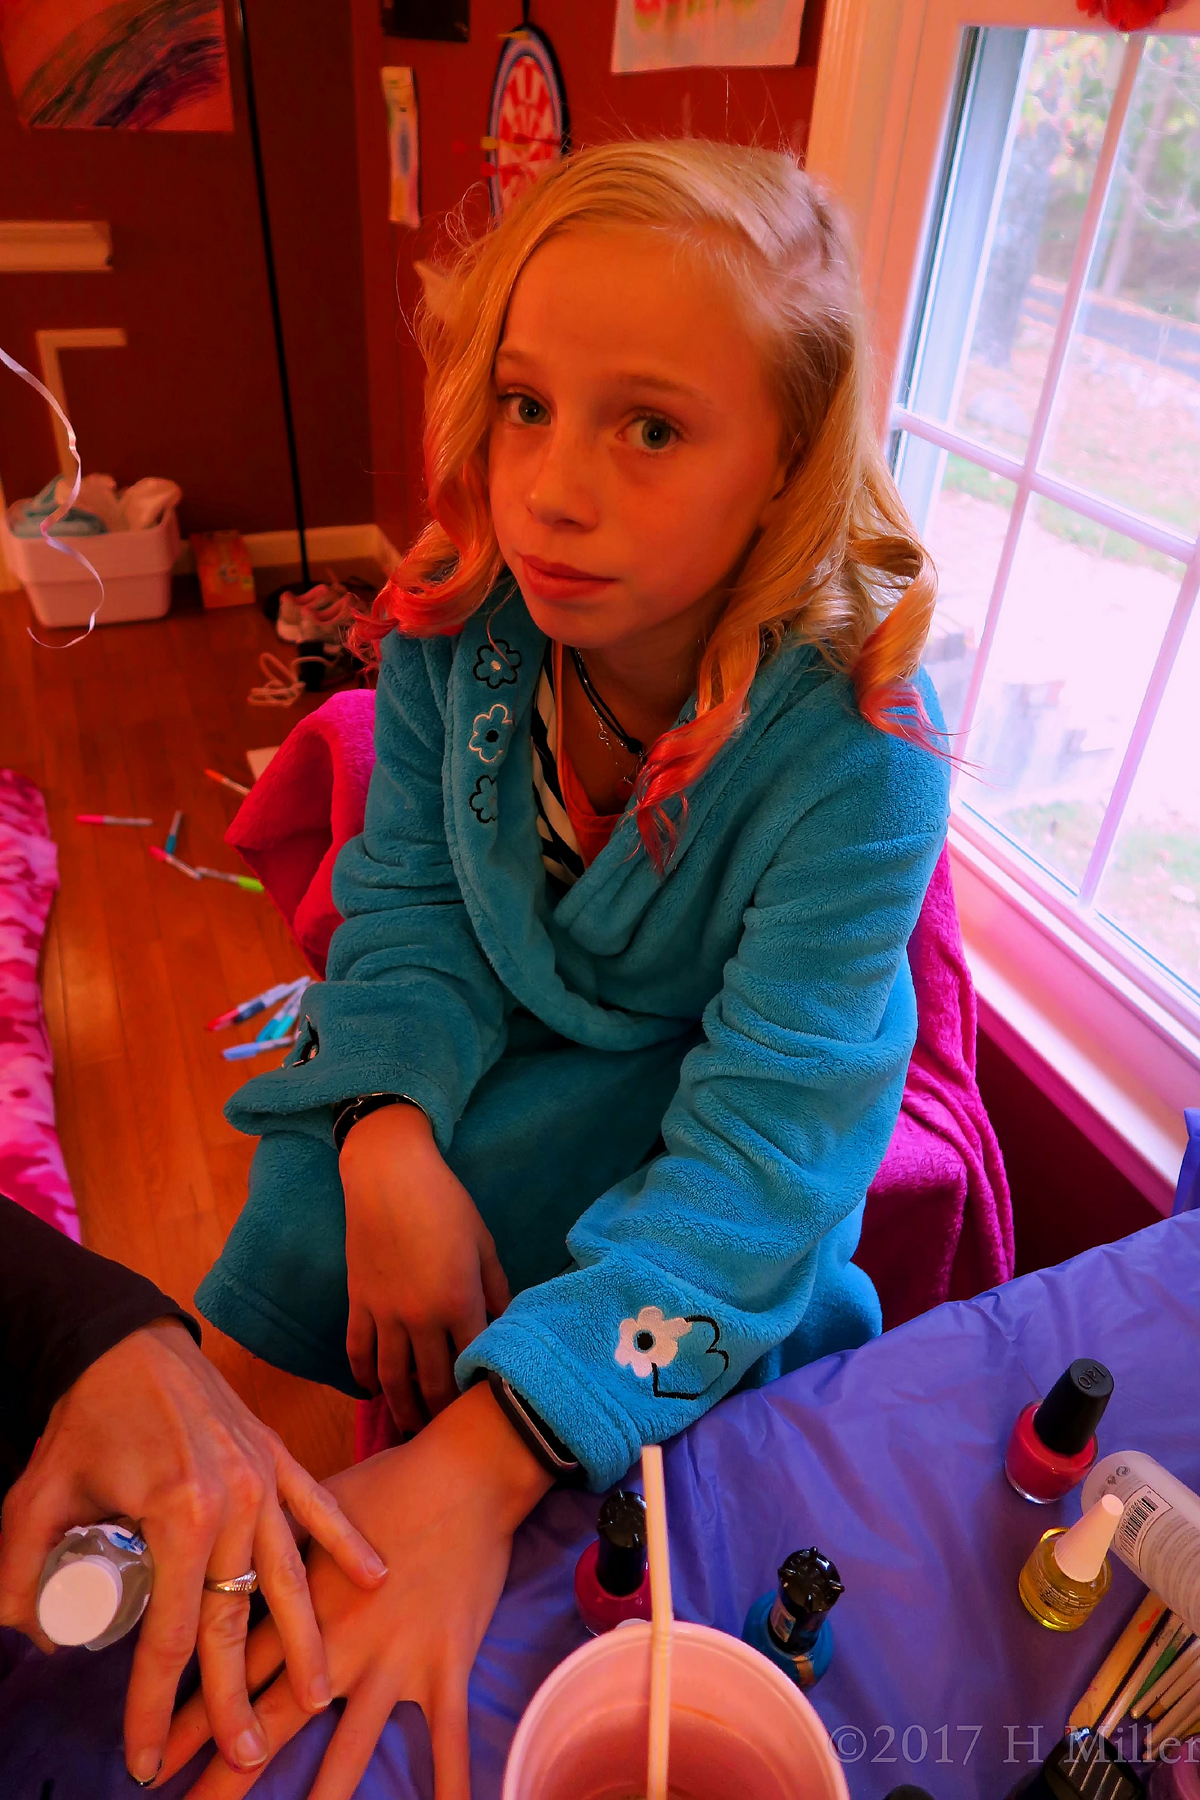 Soft Curls With A Baby Pink Hair Chalk Streak Kids Hairstyle Is Finished, Now She Gets Her Mini Manicure Done. 